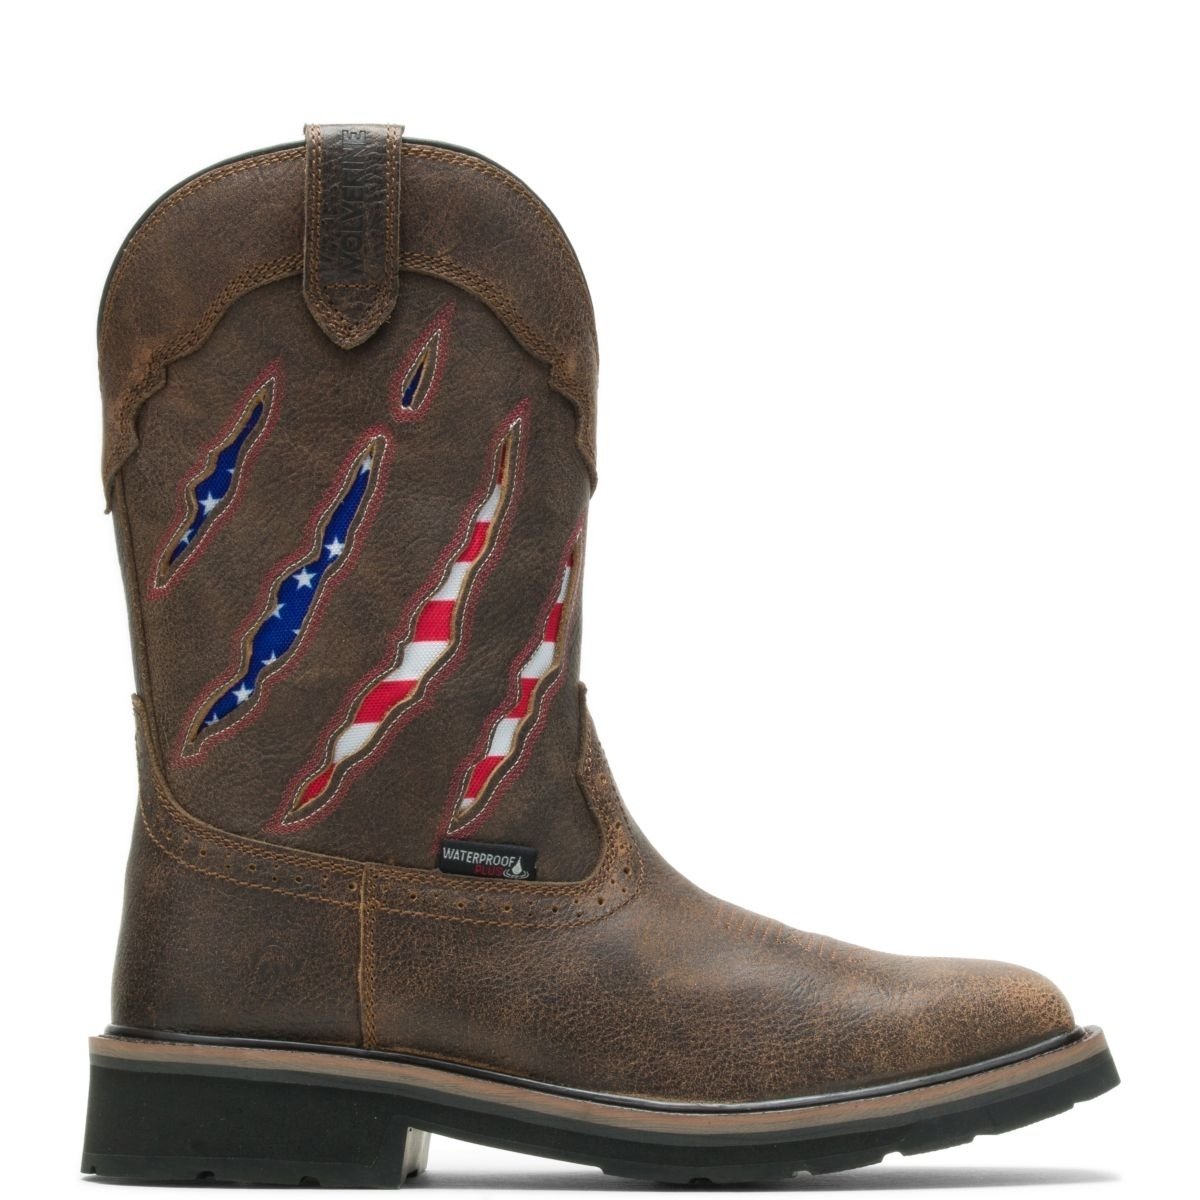 WOLVERINE Men's Rancher Claw Wellington Soft Toe Work Boot Brown/Flag - W200138 Flag/brown - Flag/brown, 10.5